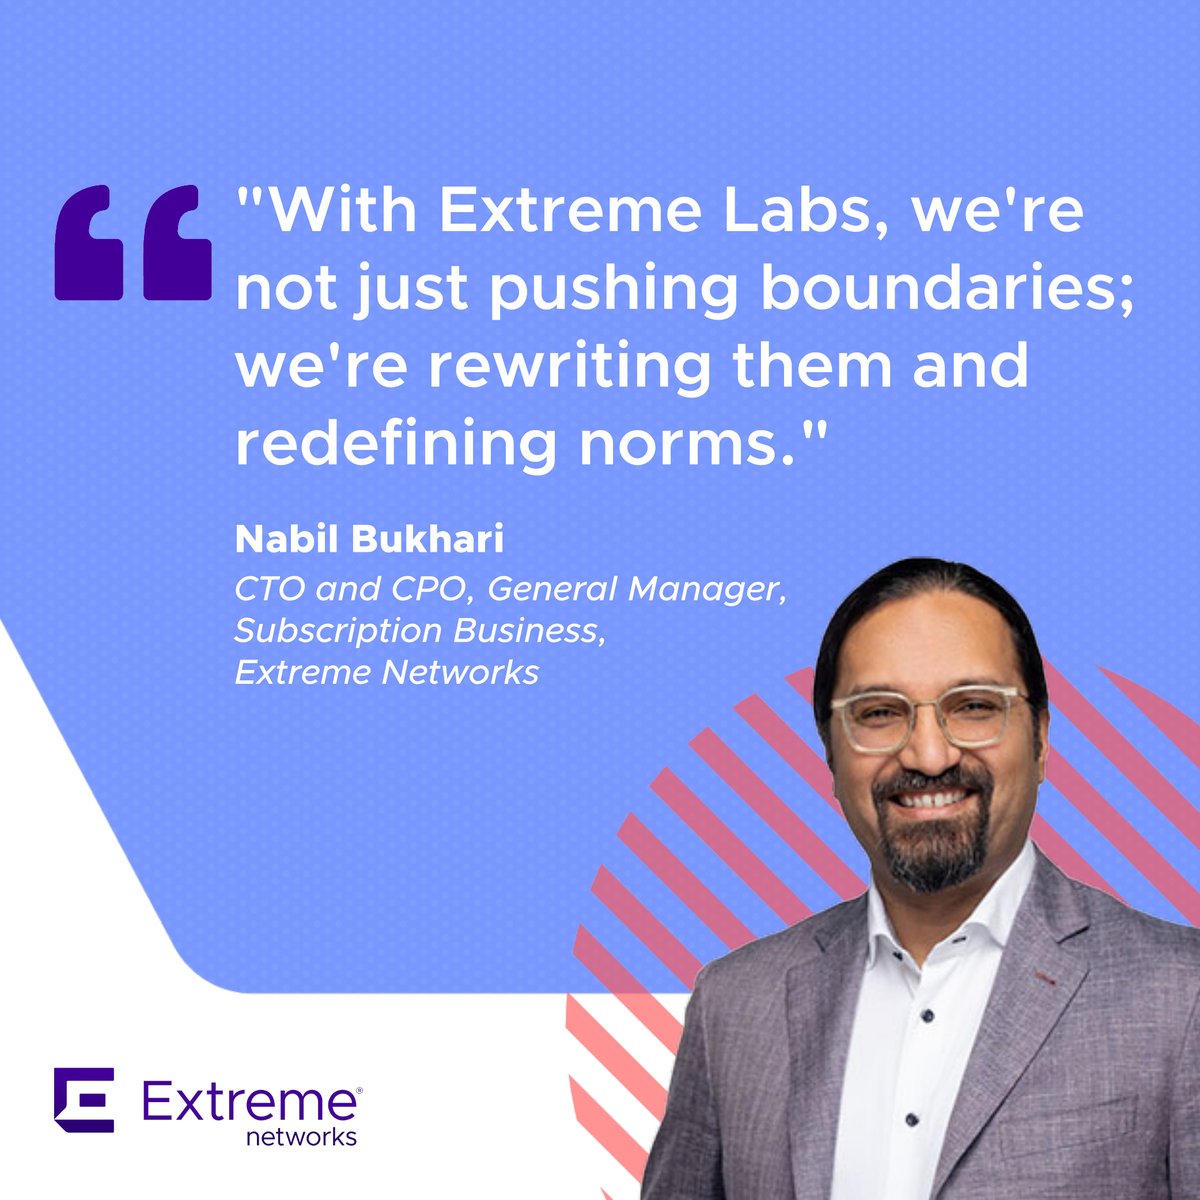 Extreme AI Expert is just the first ground-breaking tech preview from #ExtremeLabs: our new incubation hub designed to showcase Extreme technology innovations as they become closer to commercial availability. Learn more: investor.extremenetworks.com/news-releases/… #AI #GenAI